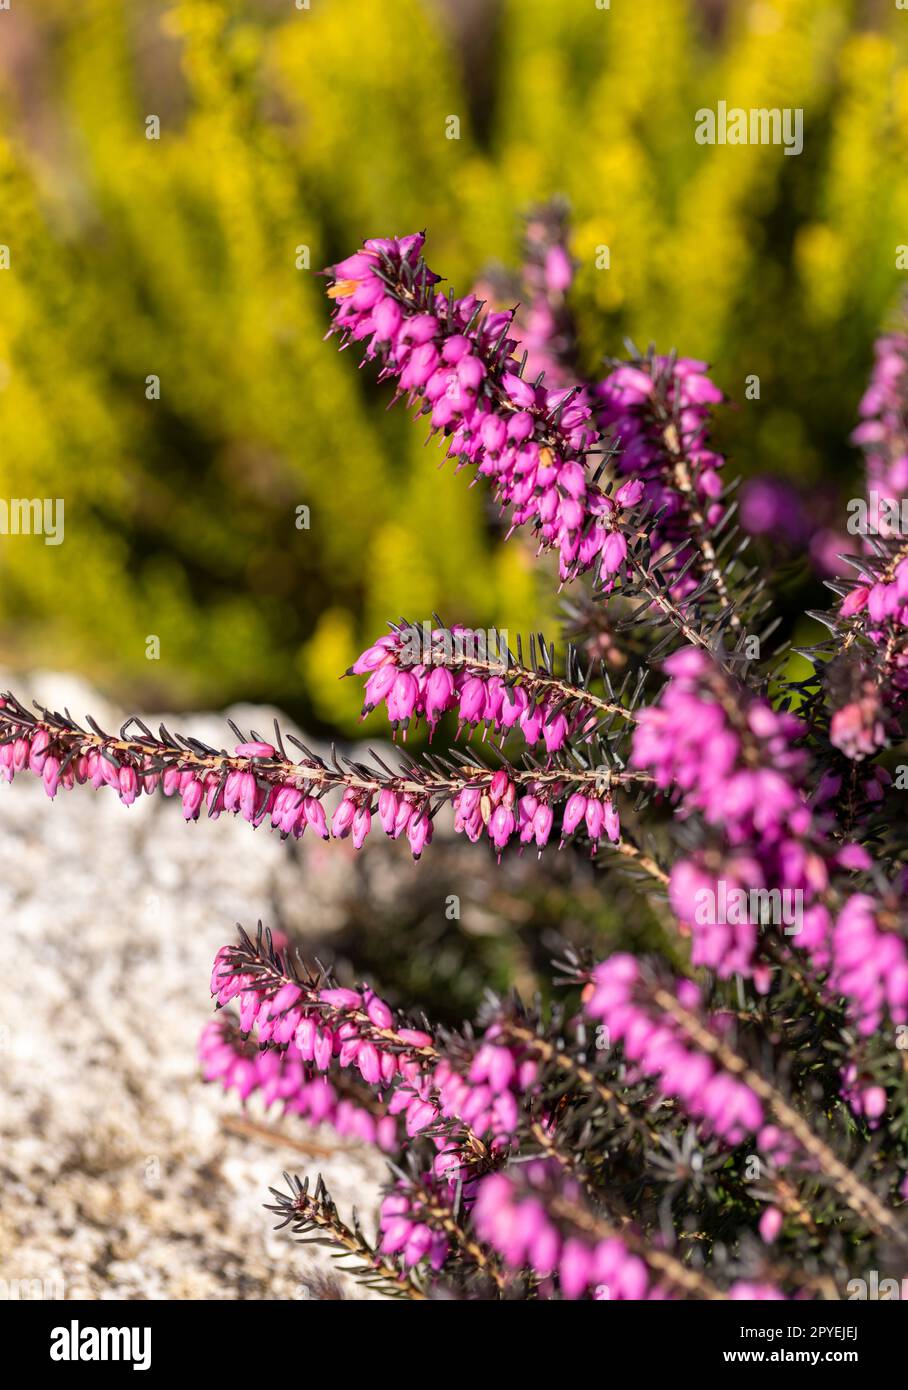 Bush of Erica with pink flowers blooming in the garden, close up Stock Photo